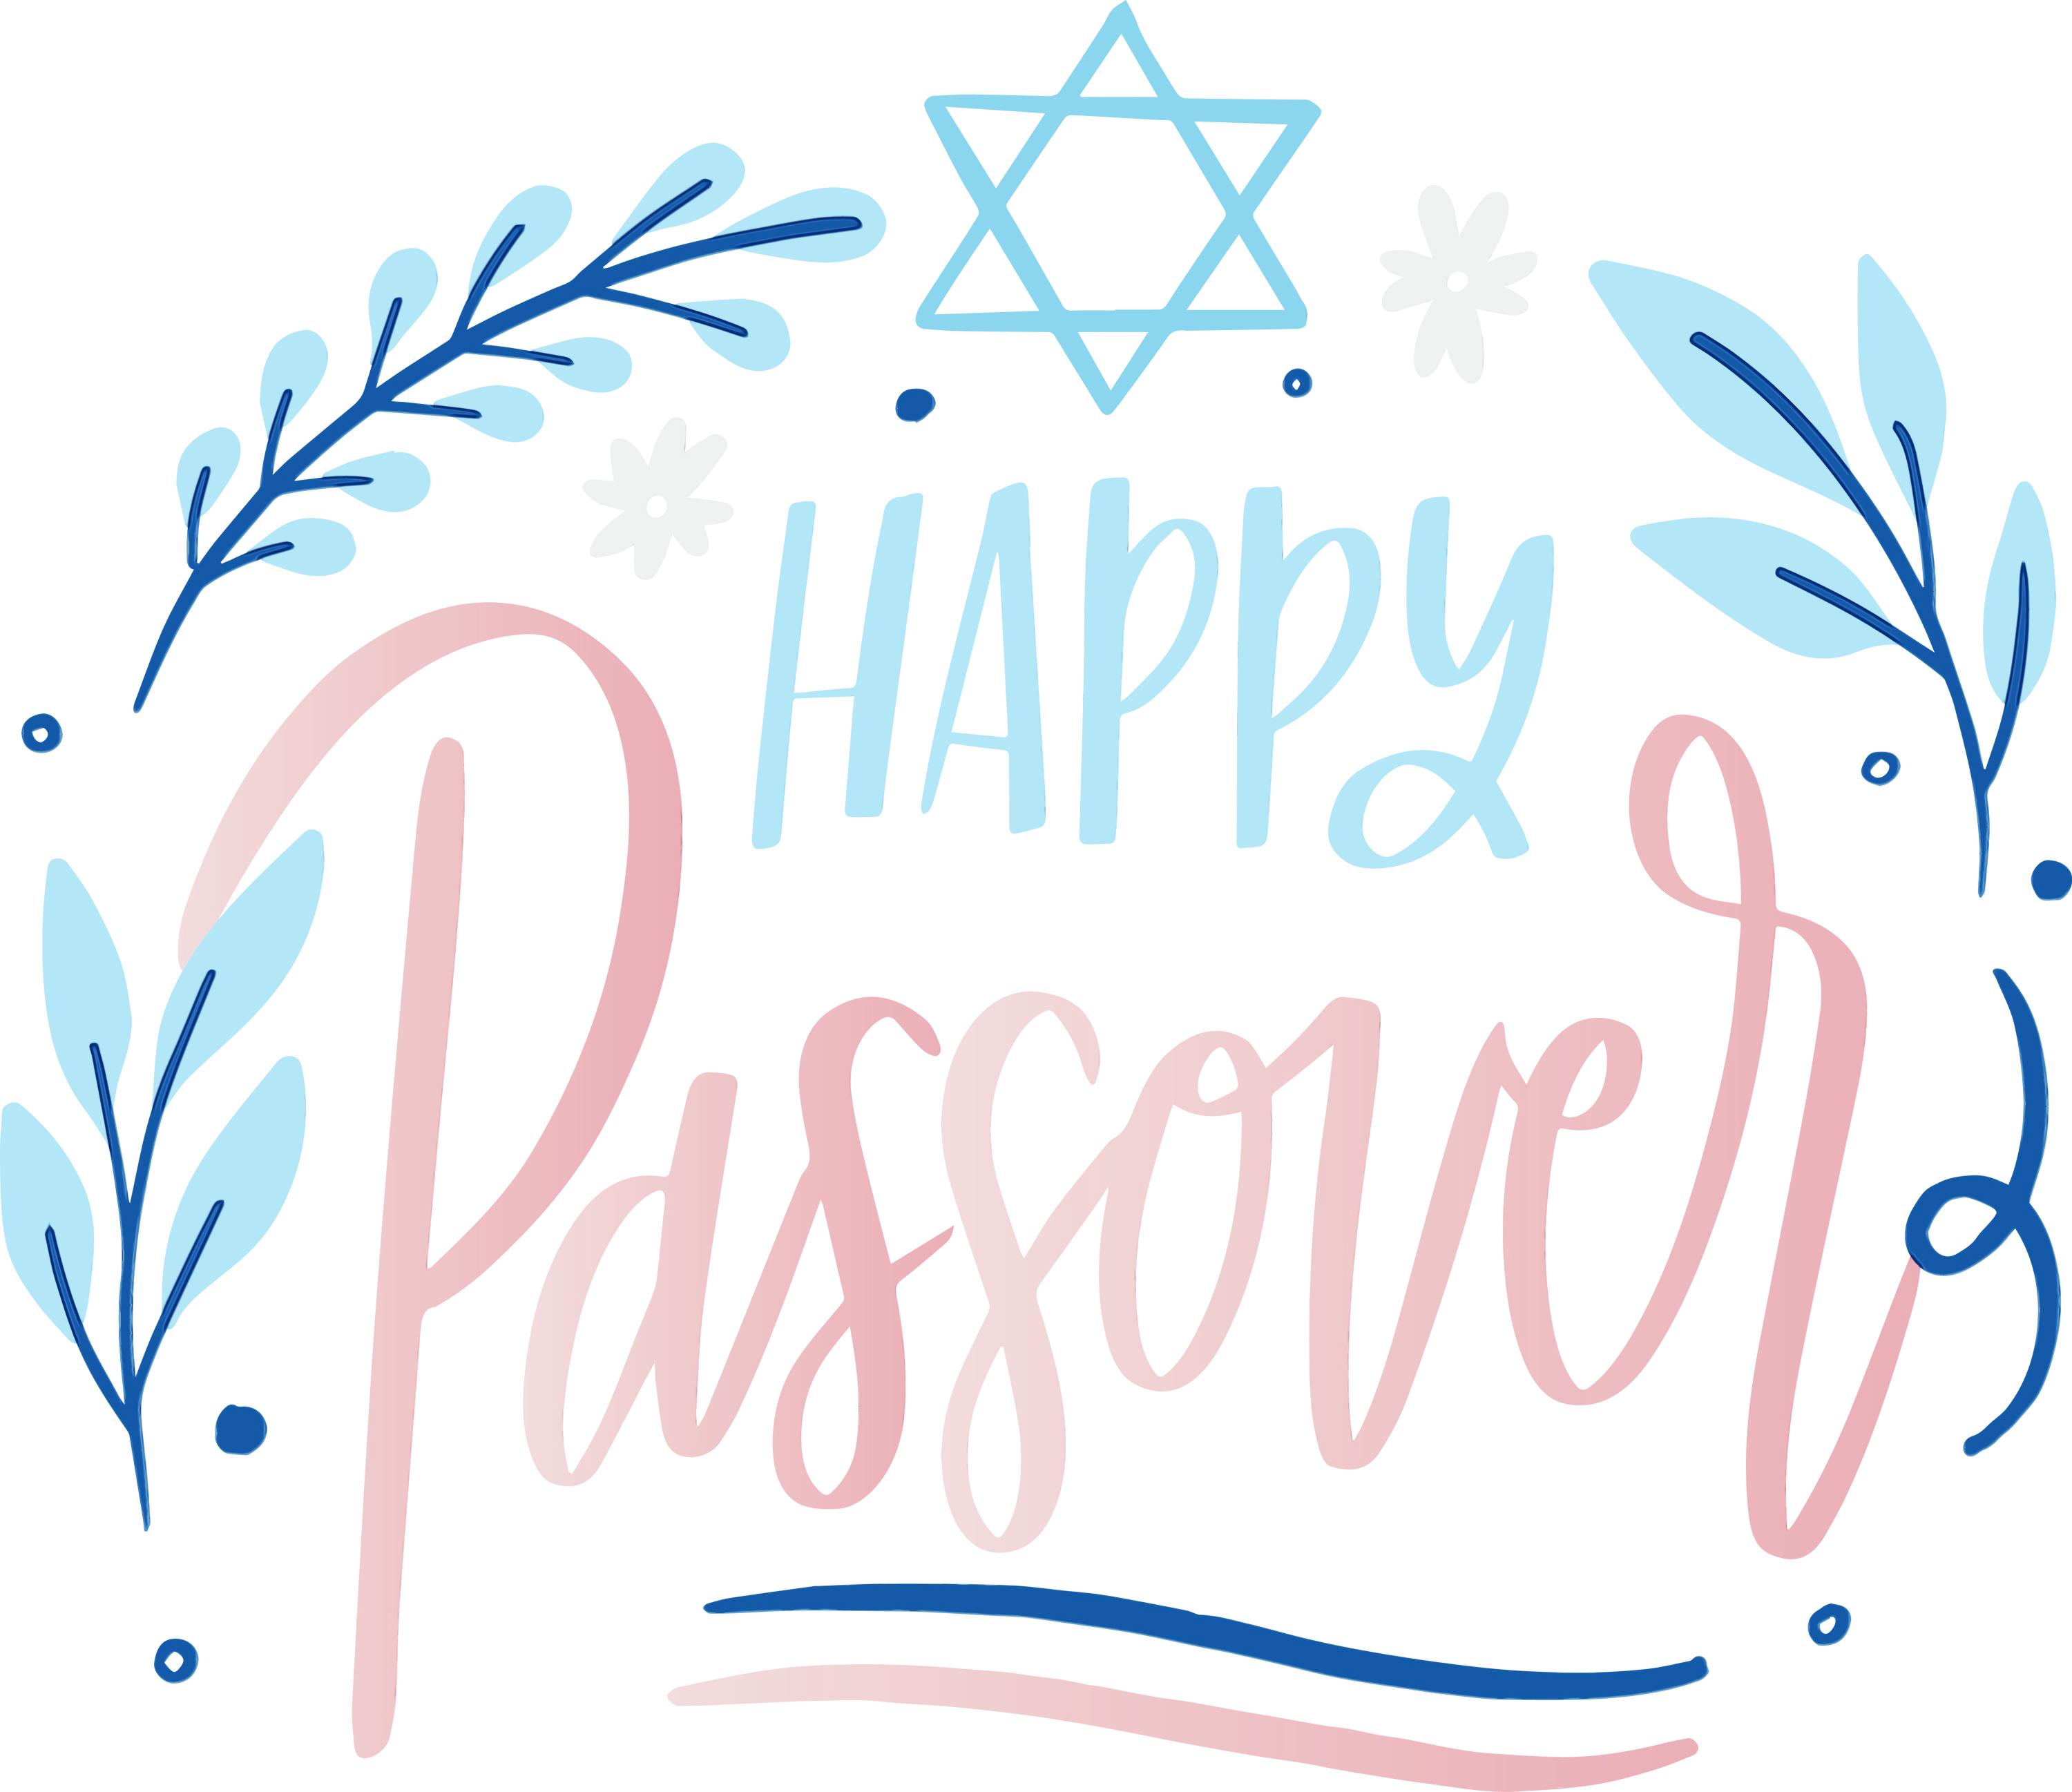 Happy Passover PNG Background Image